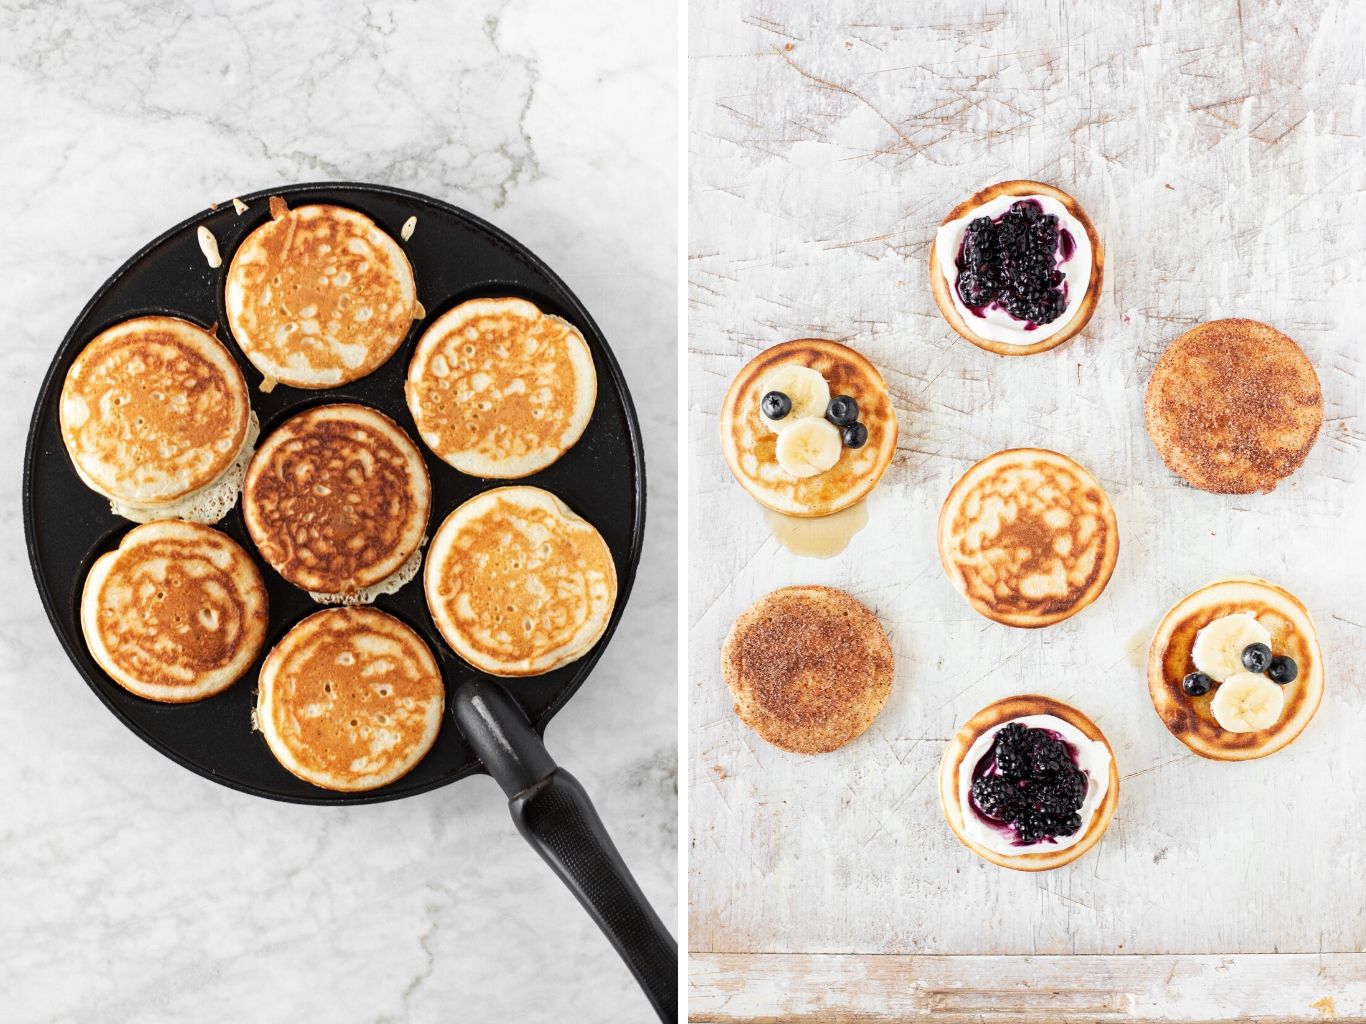 Fluffy Bohemian pancakes served with yogurt and blackberries, maple syrup, bananas and blueberries, and dipped in cinnamon sugar | verygoodcook.com